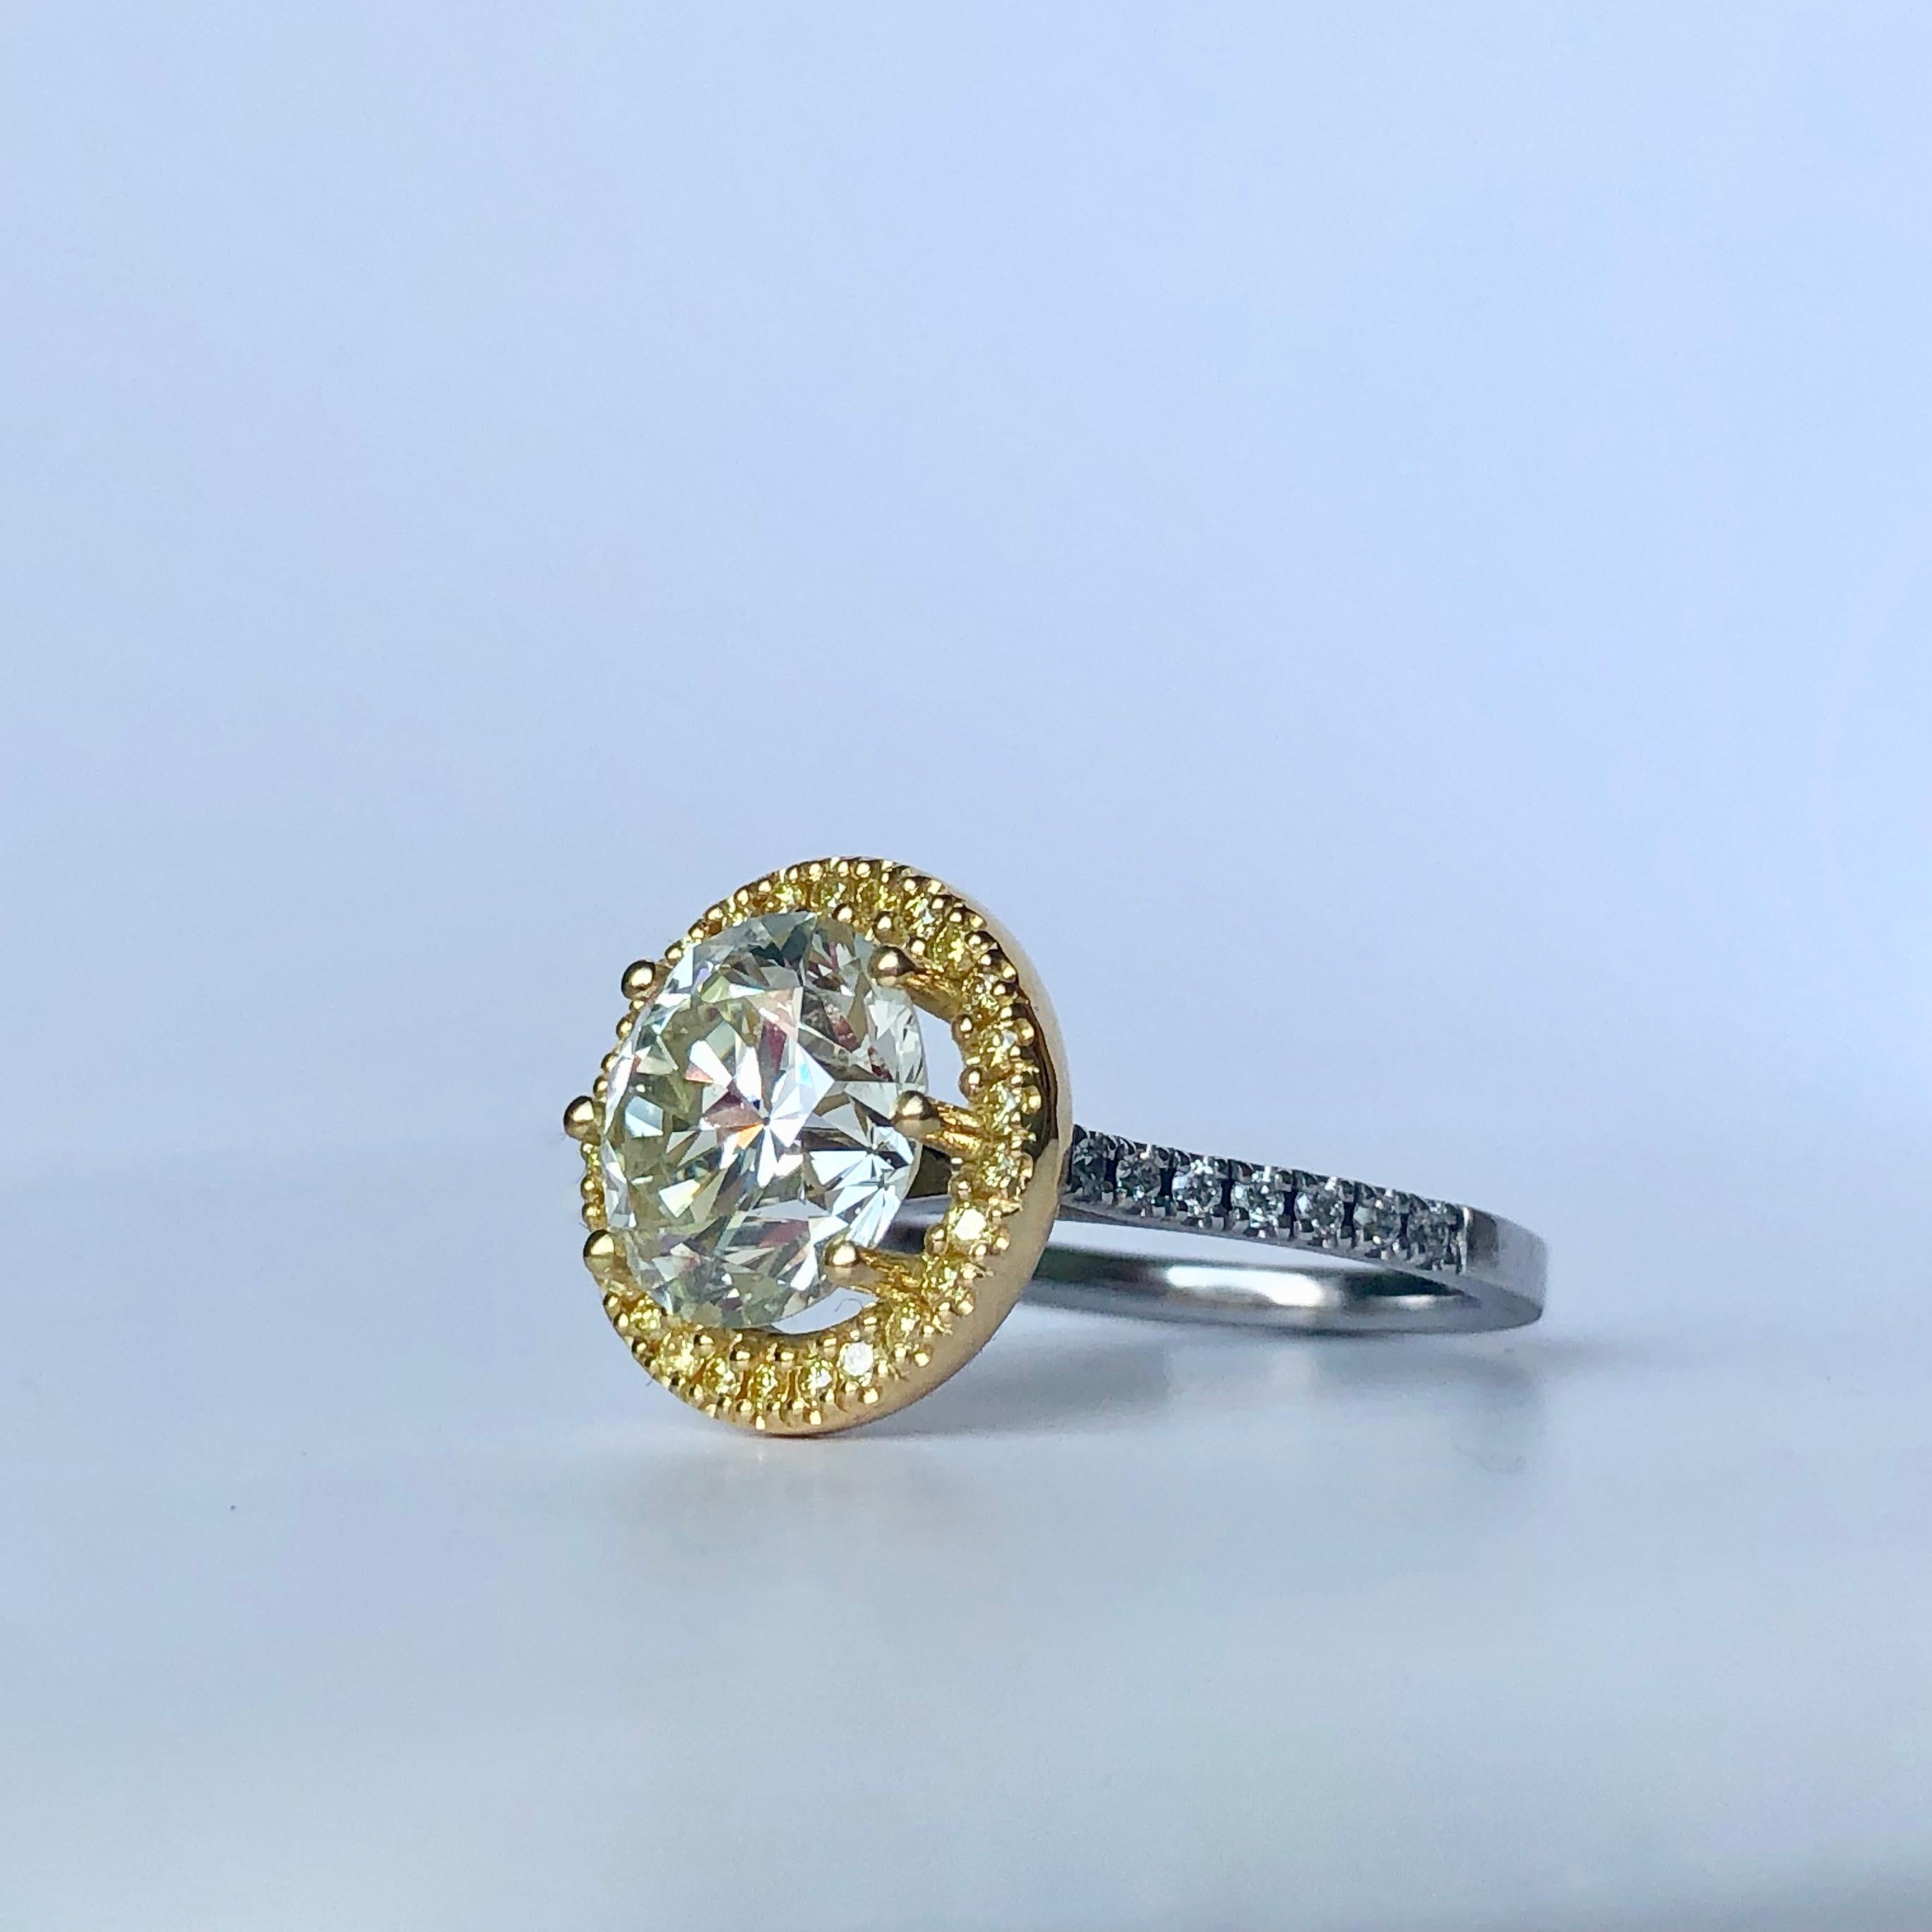 Round Cut Diamond In Fancy Yellow Diamond Halo

Bi Colour 18k Gold 

Total Carat Weight 4.10ct 

Principal Diamond 3.80ct M/N colour - VS Clarity 
A very clean and lively diamond

available any ring size

Videos available 

This is a diamond from a